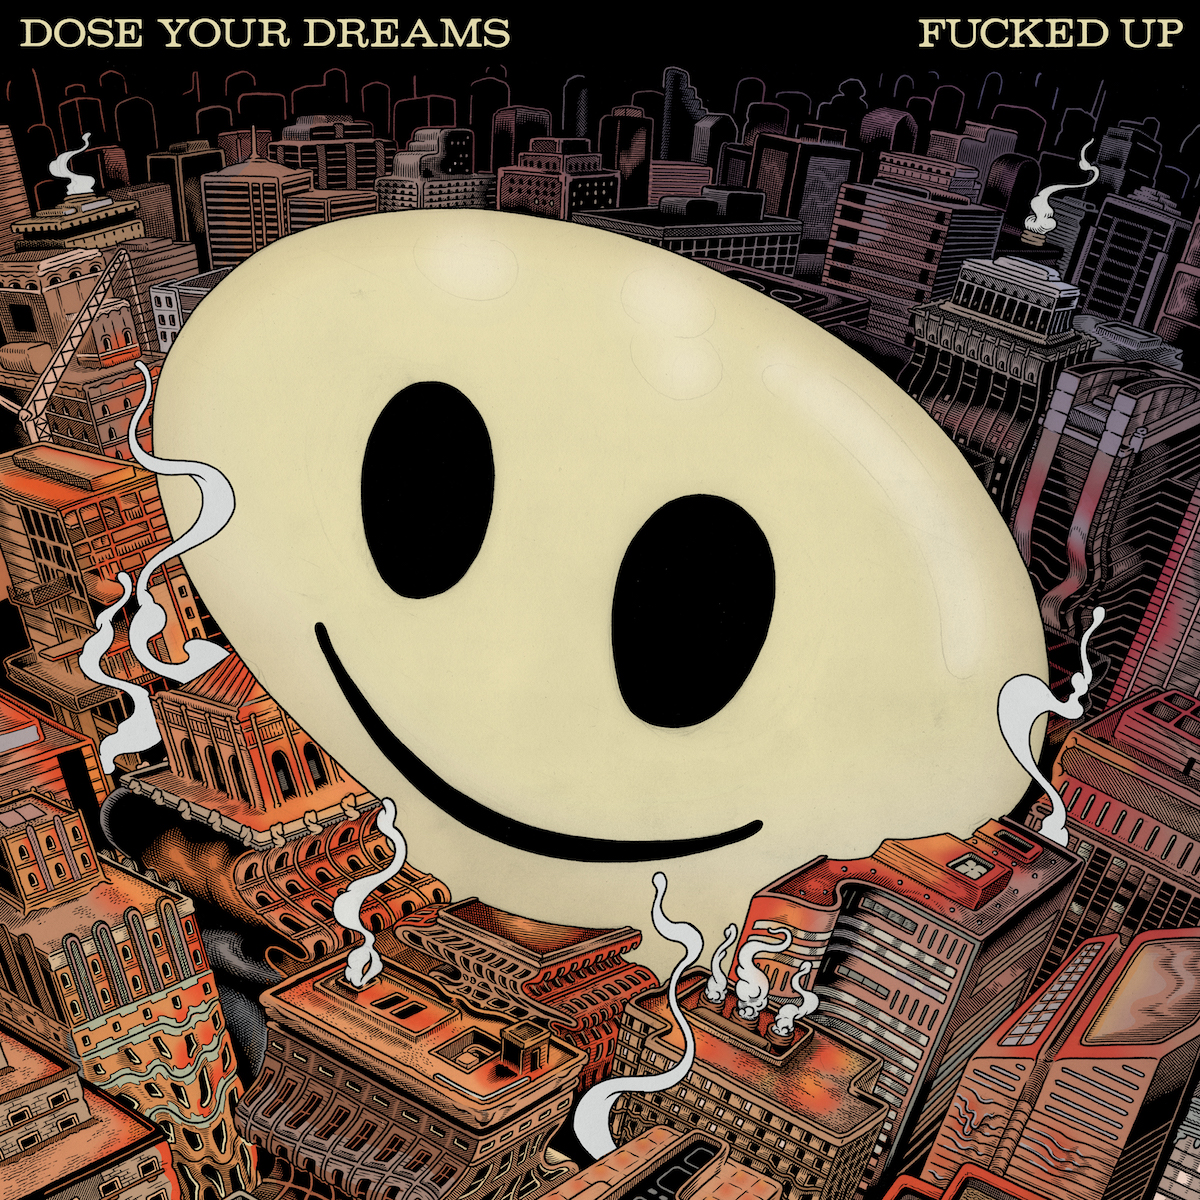 fucked up dose your dreams album review